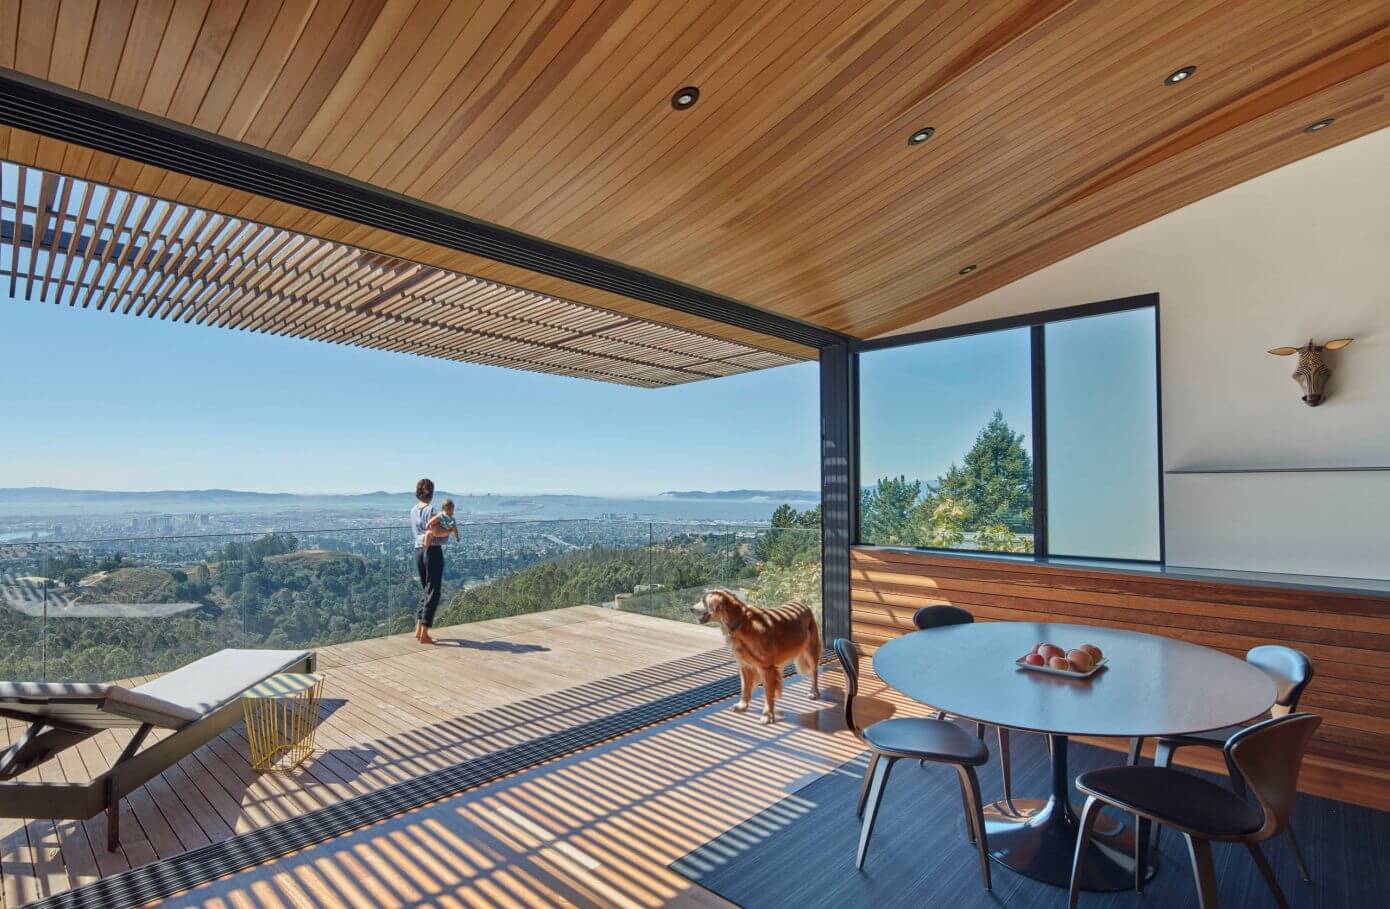 Skyline House by Terry and Terry Architecture